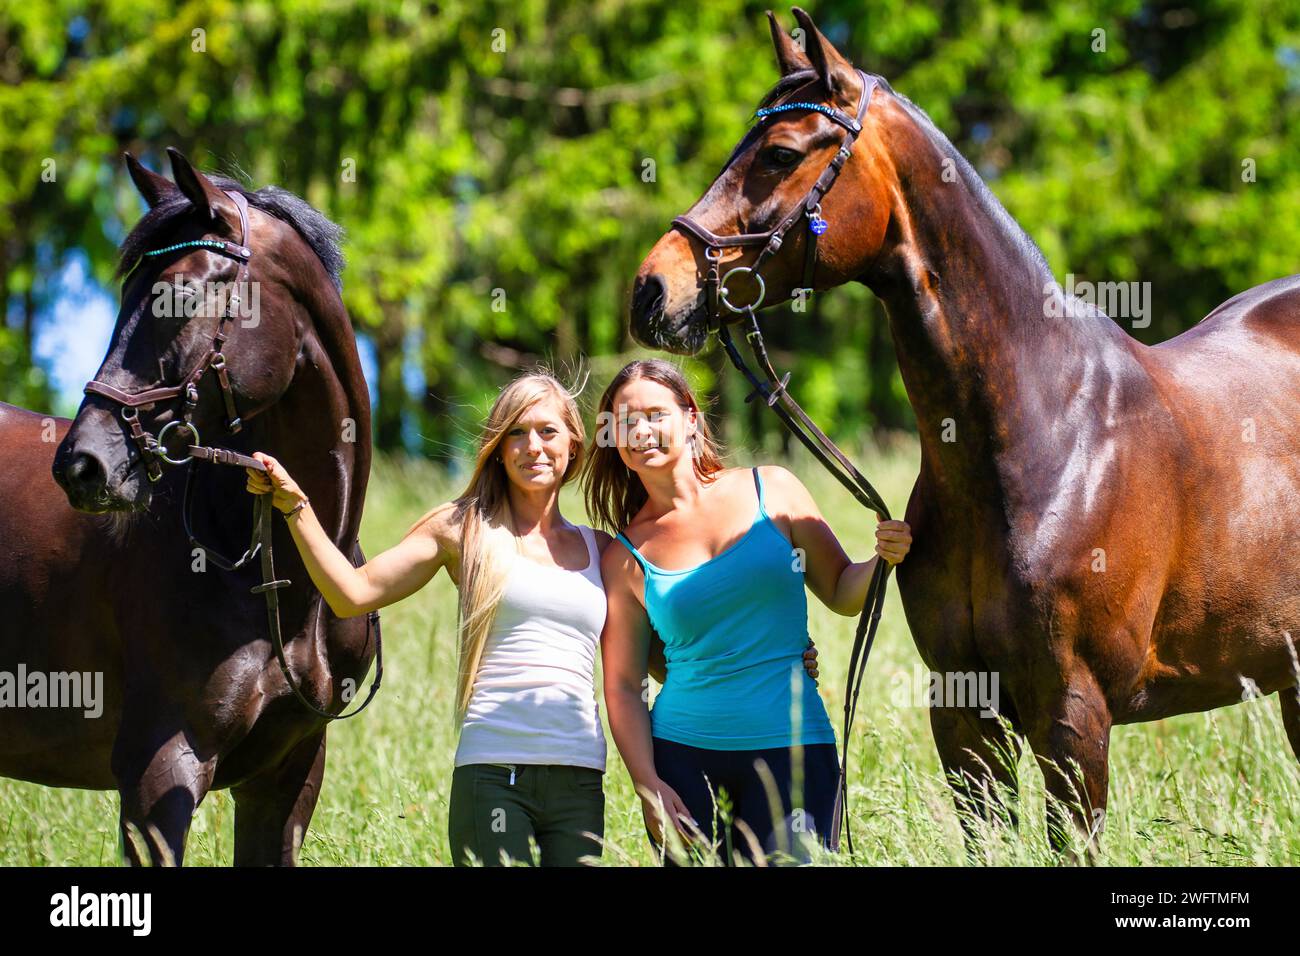 The picture shows two young women in light summer riding clothes with long brunette hair, standing with their horses on a summer meadow and laughing i Stock Photo